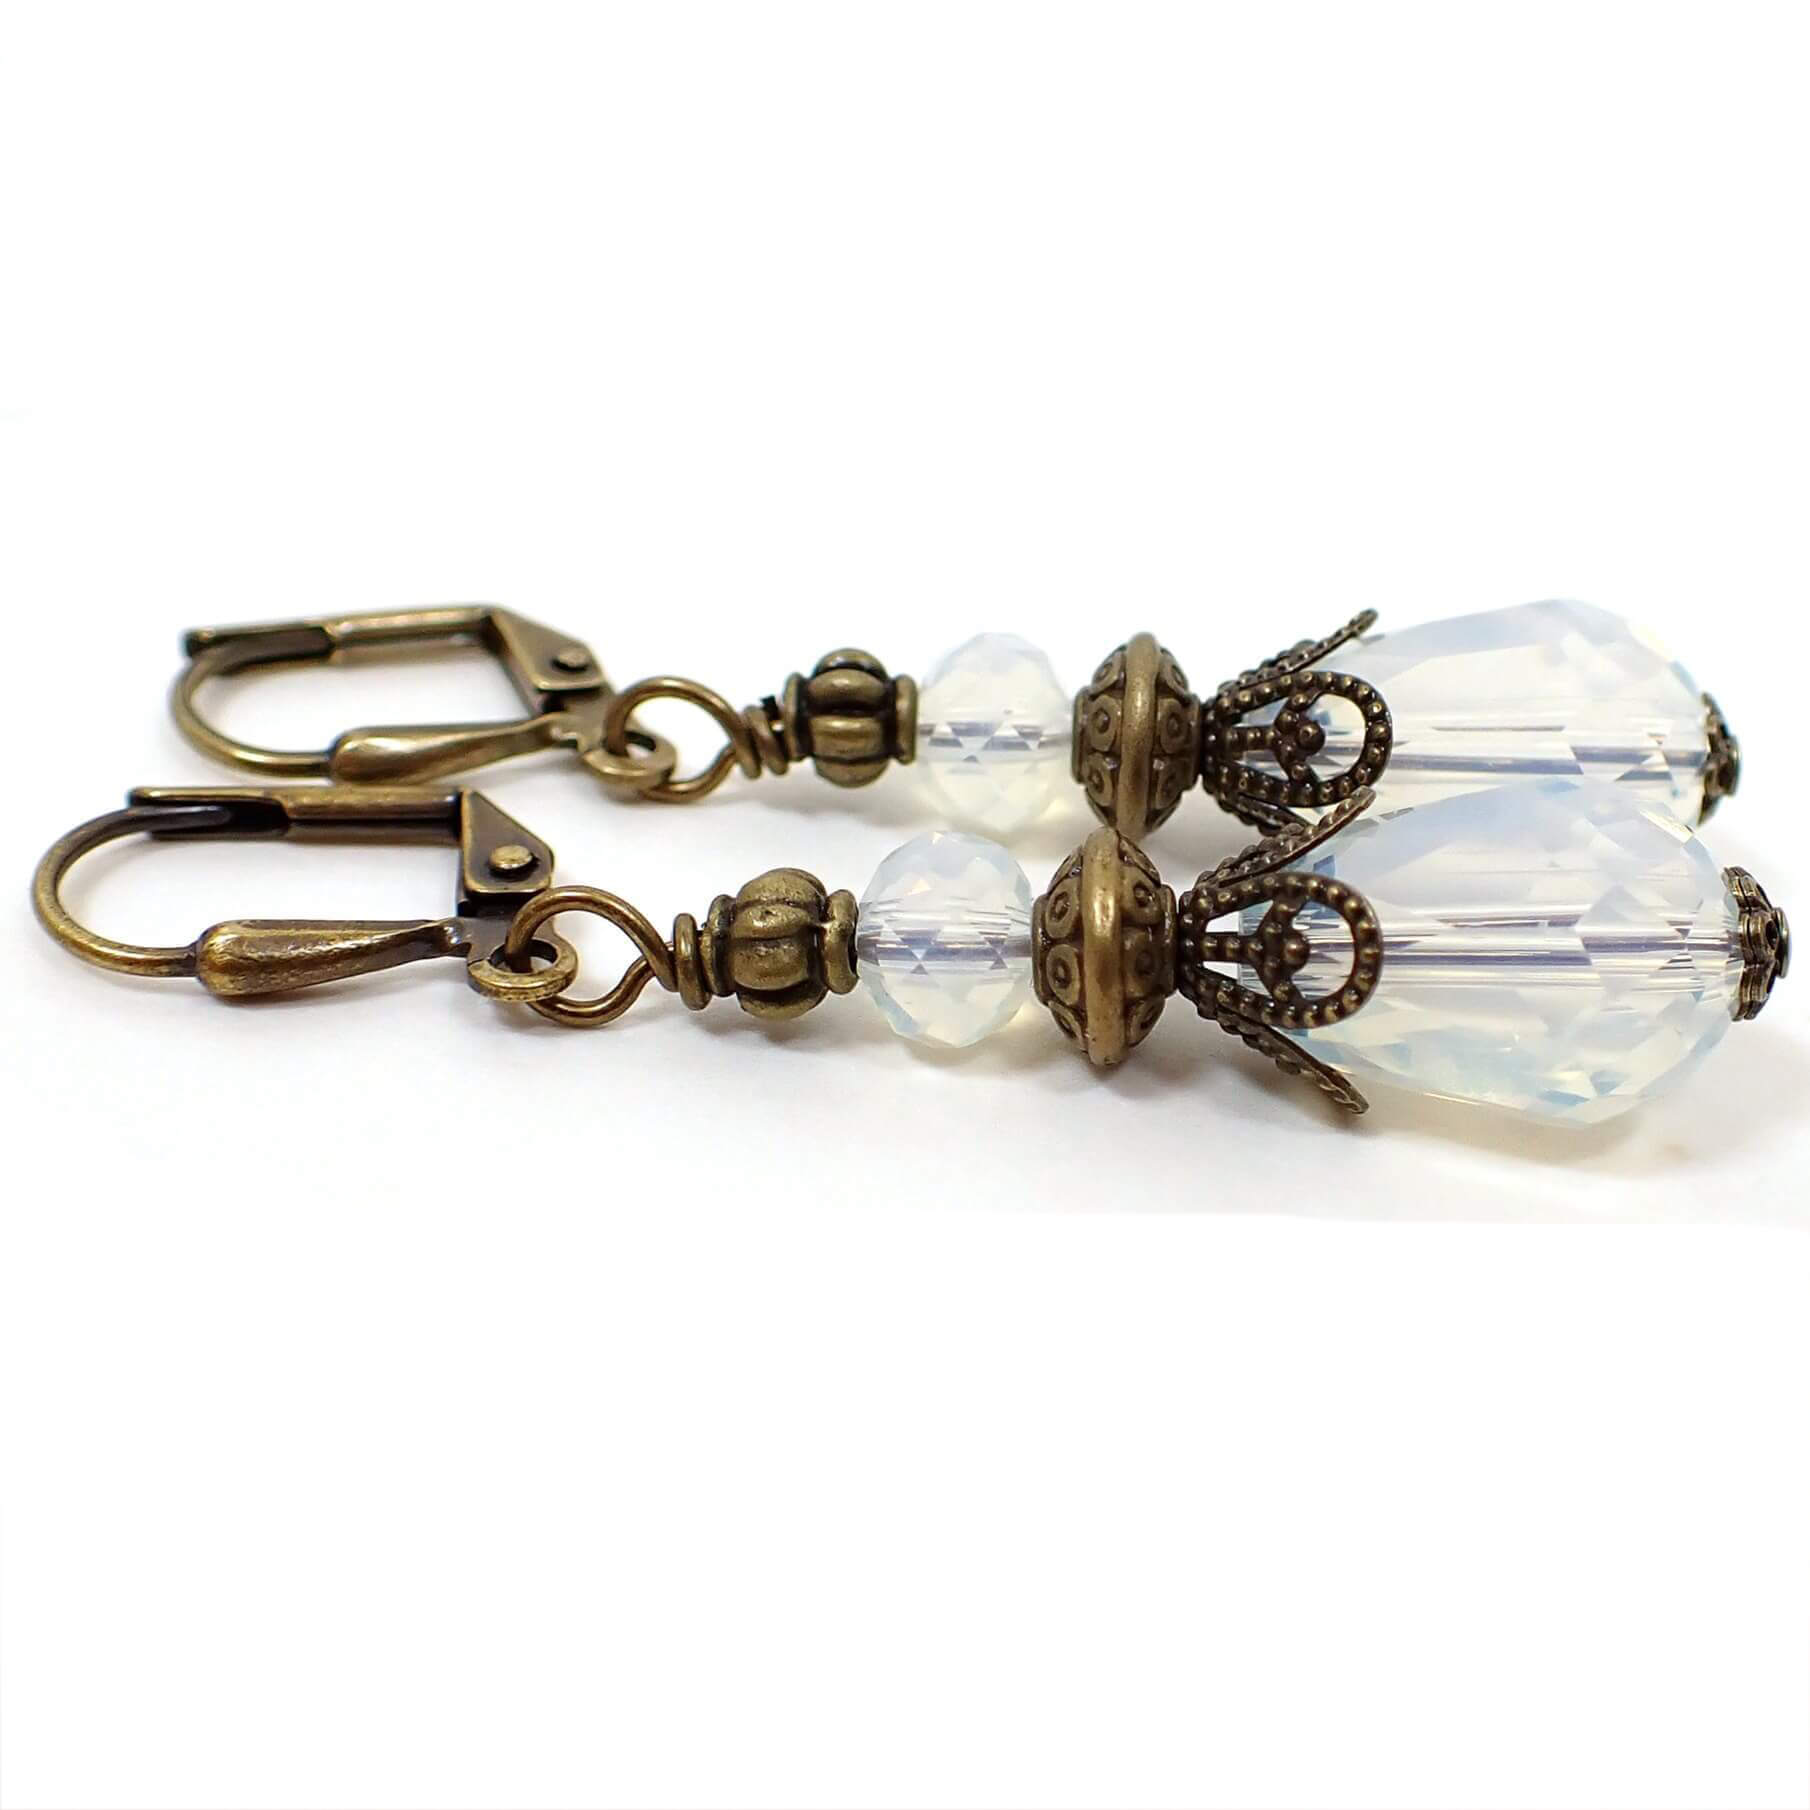 Side view of the handmade faceted glass crystal teardrop earrings. The metal is antiqued brass in color. The beads are translucent with a slightly cloudy opal color appearance.